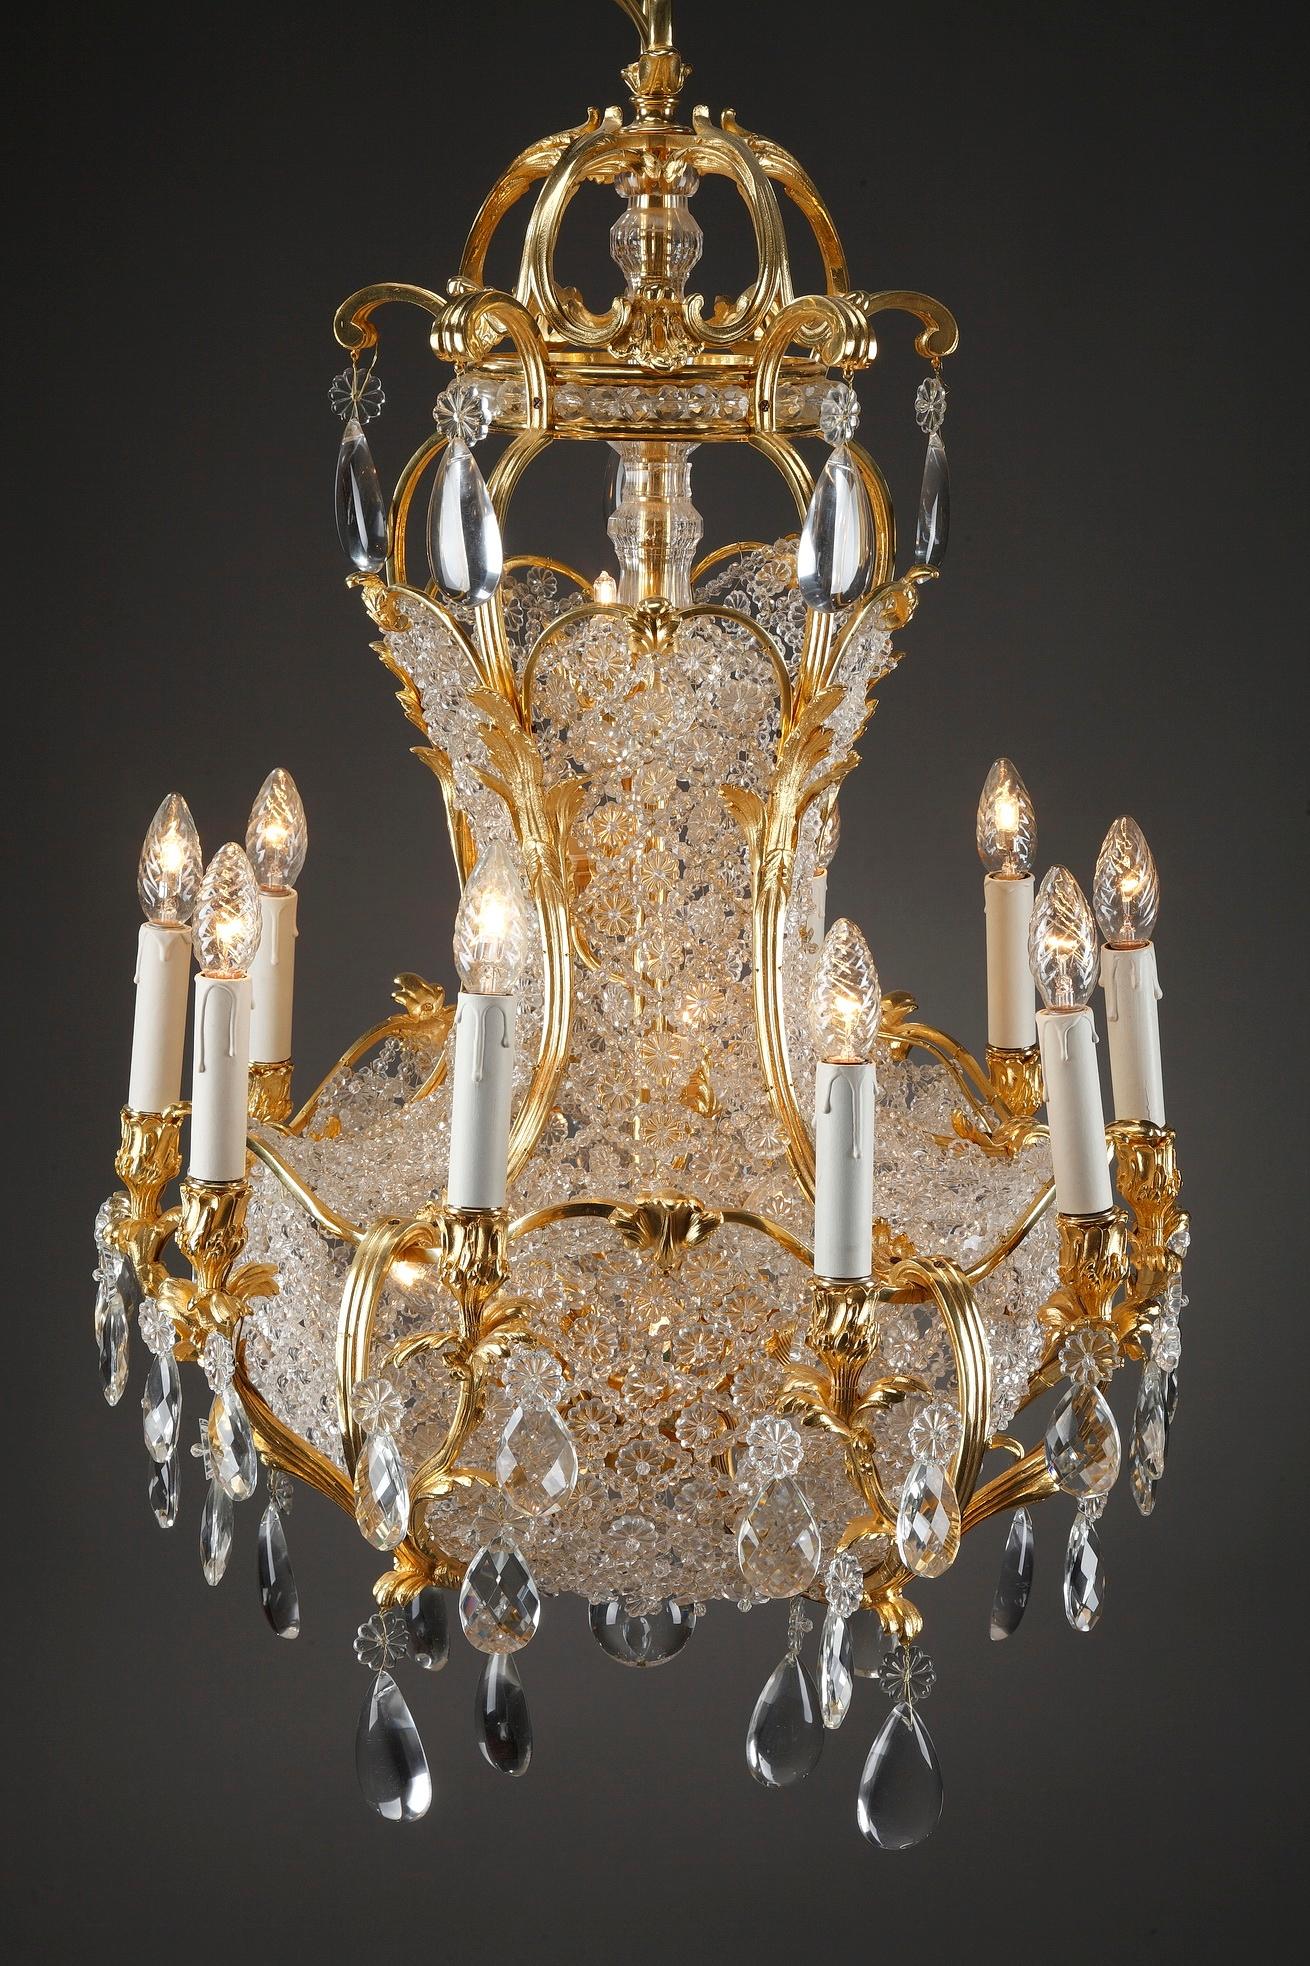 Monumental 10-light basket-shaped chandelier of gilt bronze and crystal, crafted in the late 19th century in France. Beautifully designed oversized prisms, rosette and slice-cut drops of polished crystal hang from scrolling ormolu branches. This